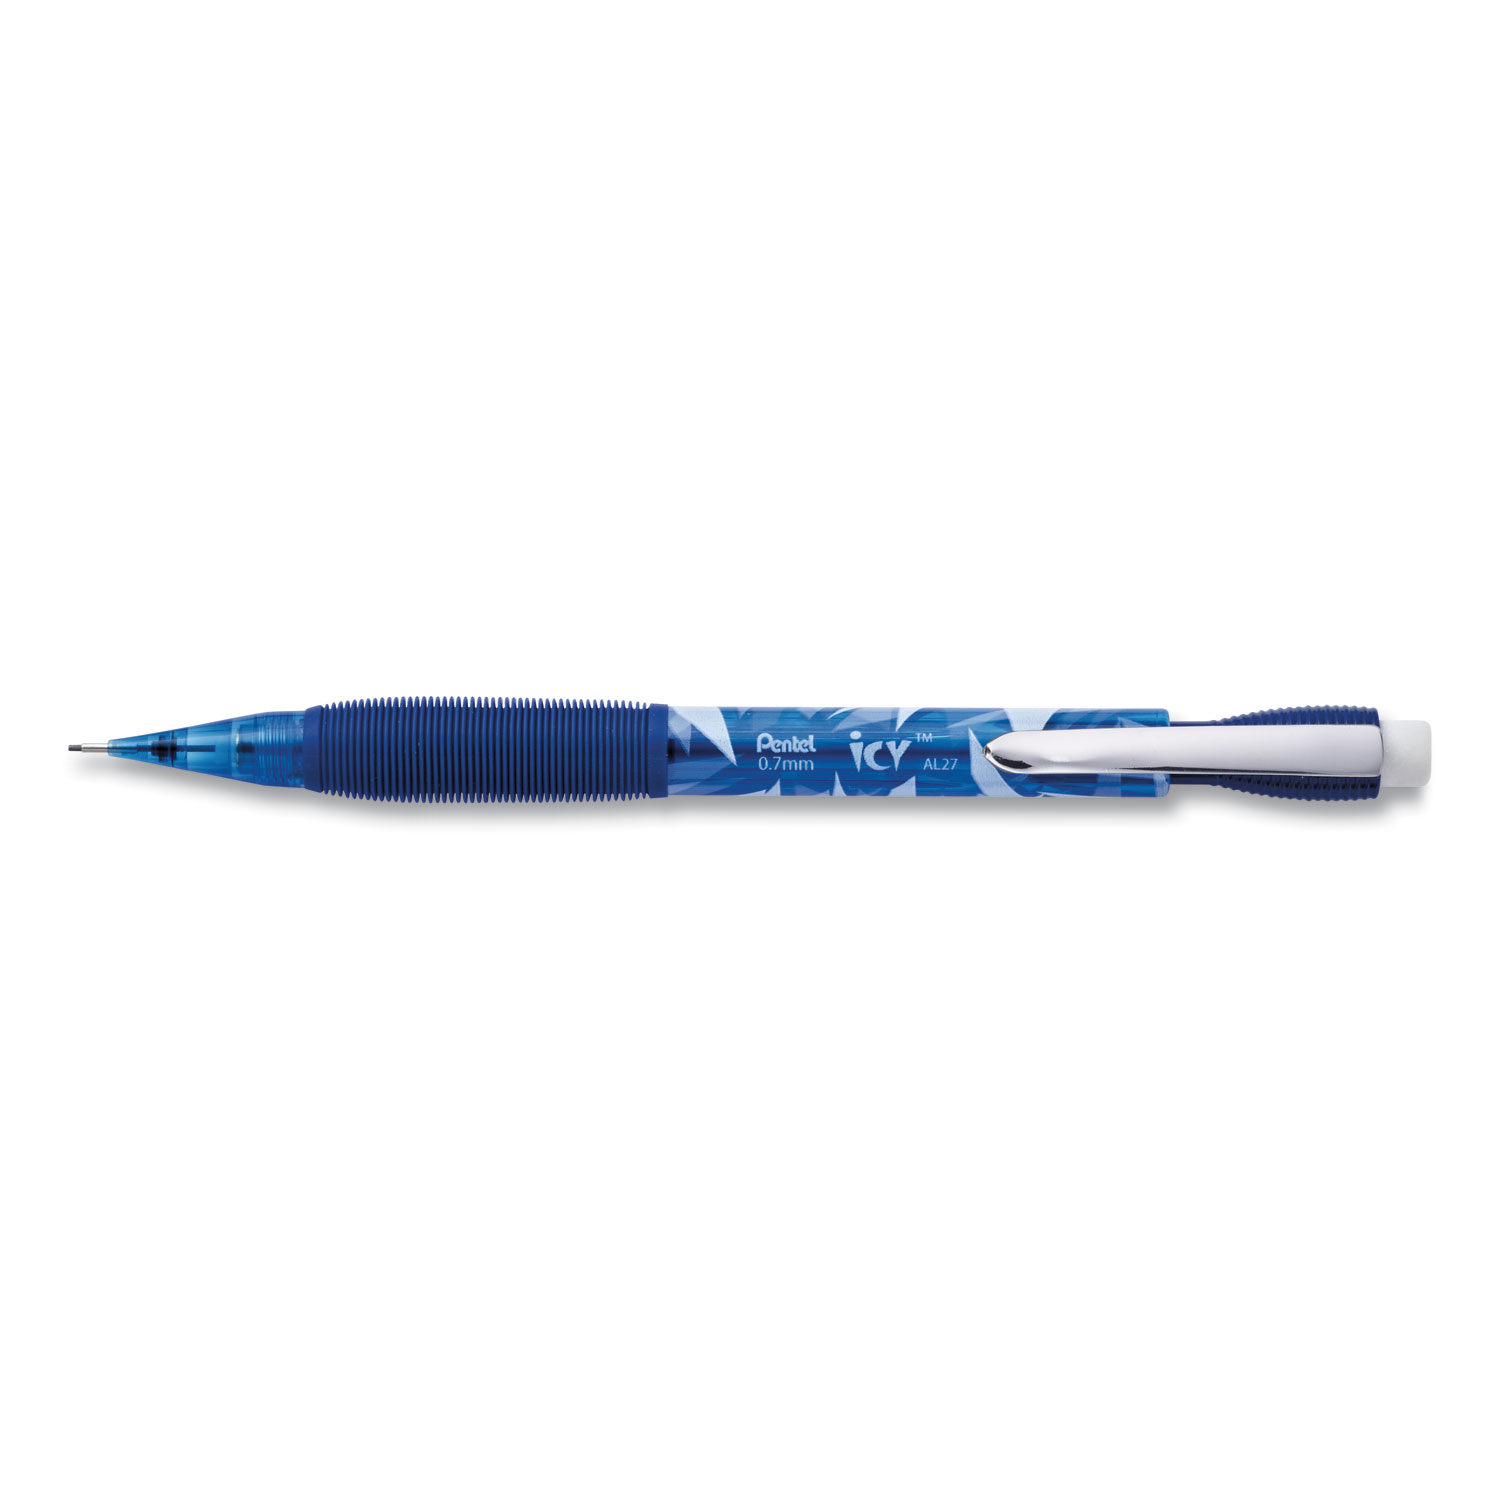 Soft Grip 0.7mm HB Mechanical Refillable Pencil With Extra Lead & Eraser